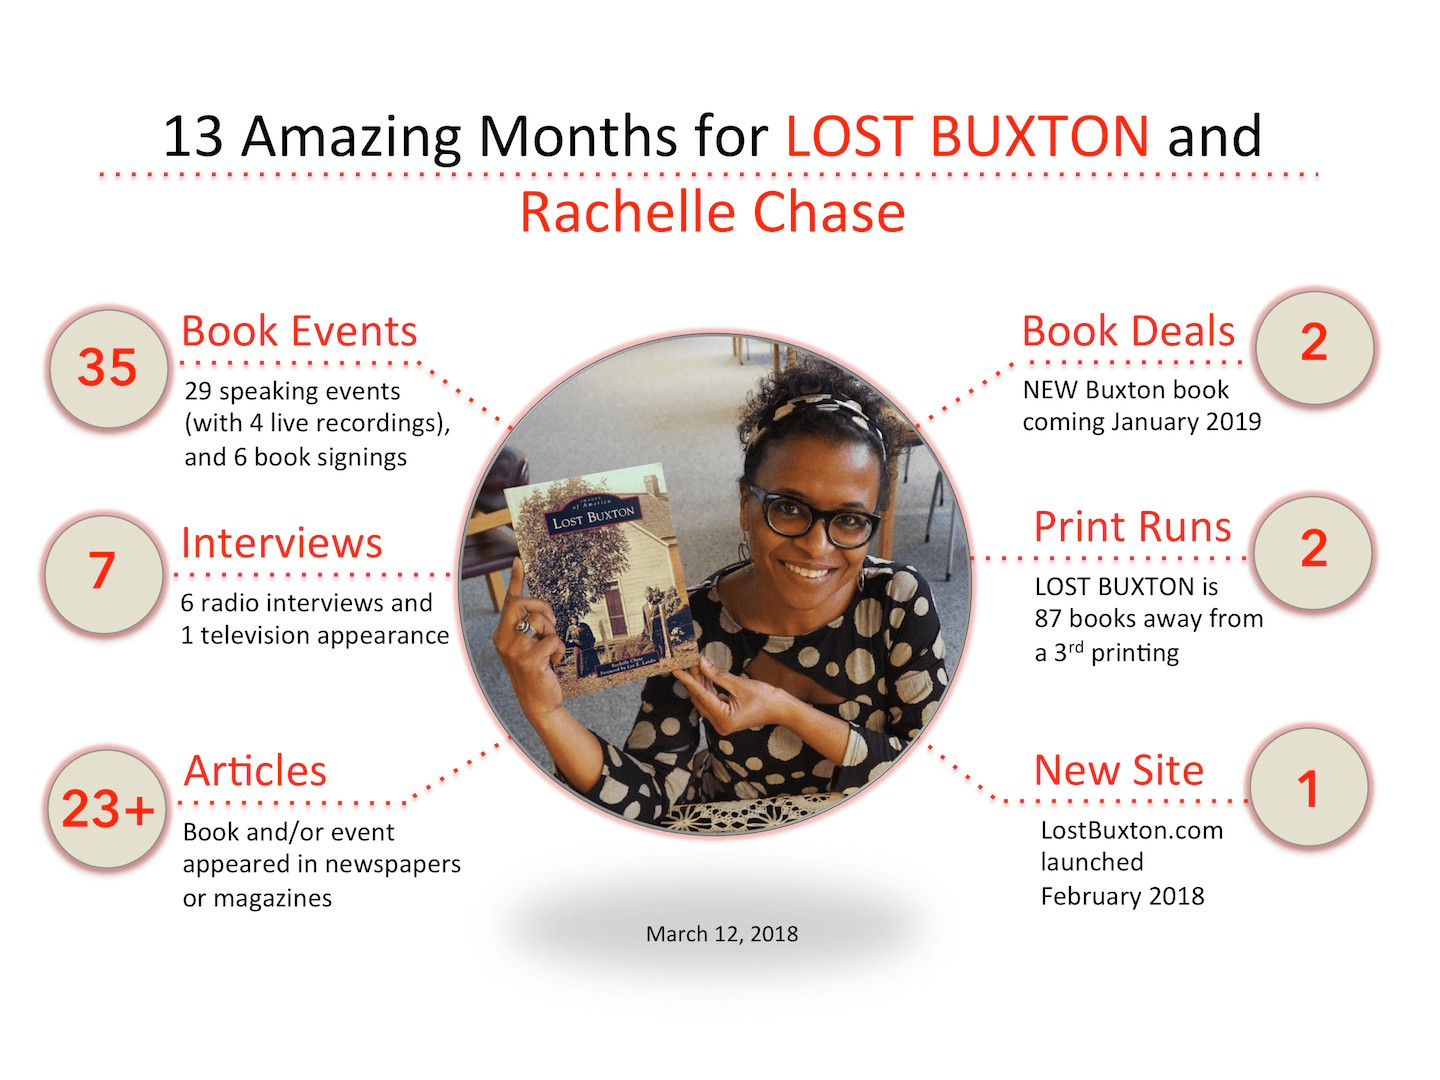 Lost Buxton and Rachelle Chase